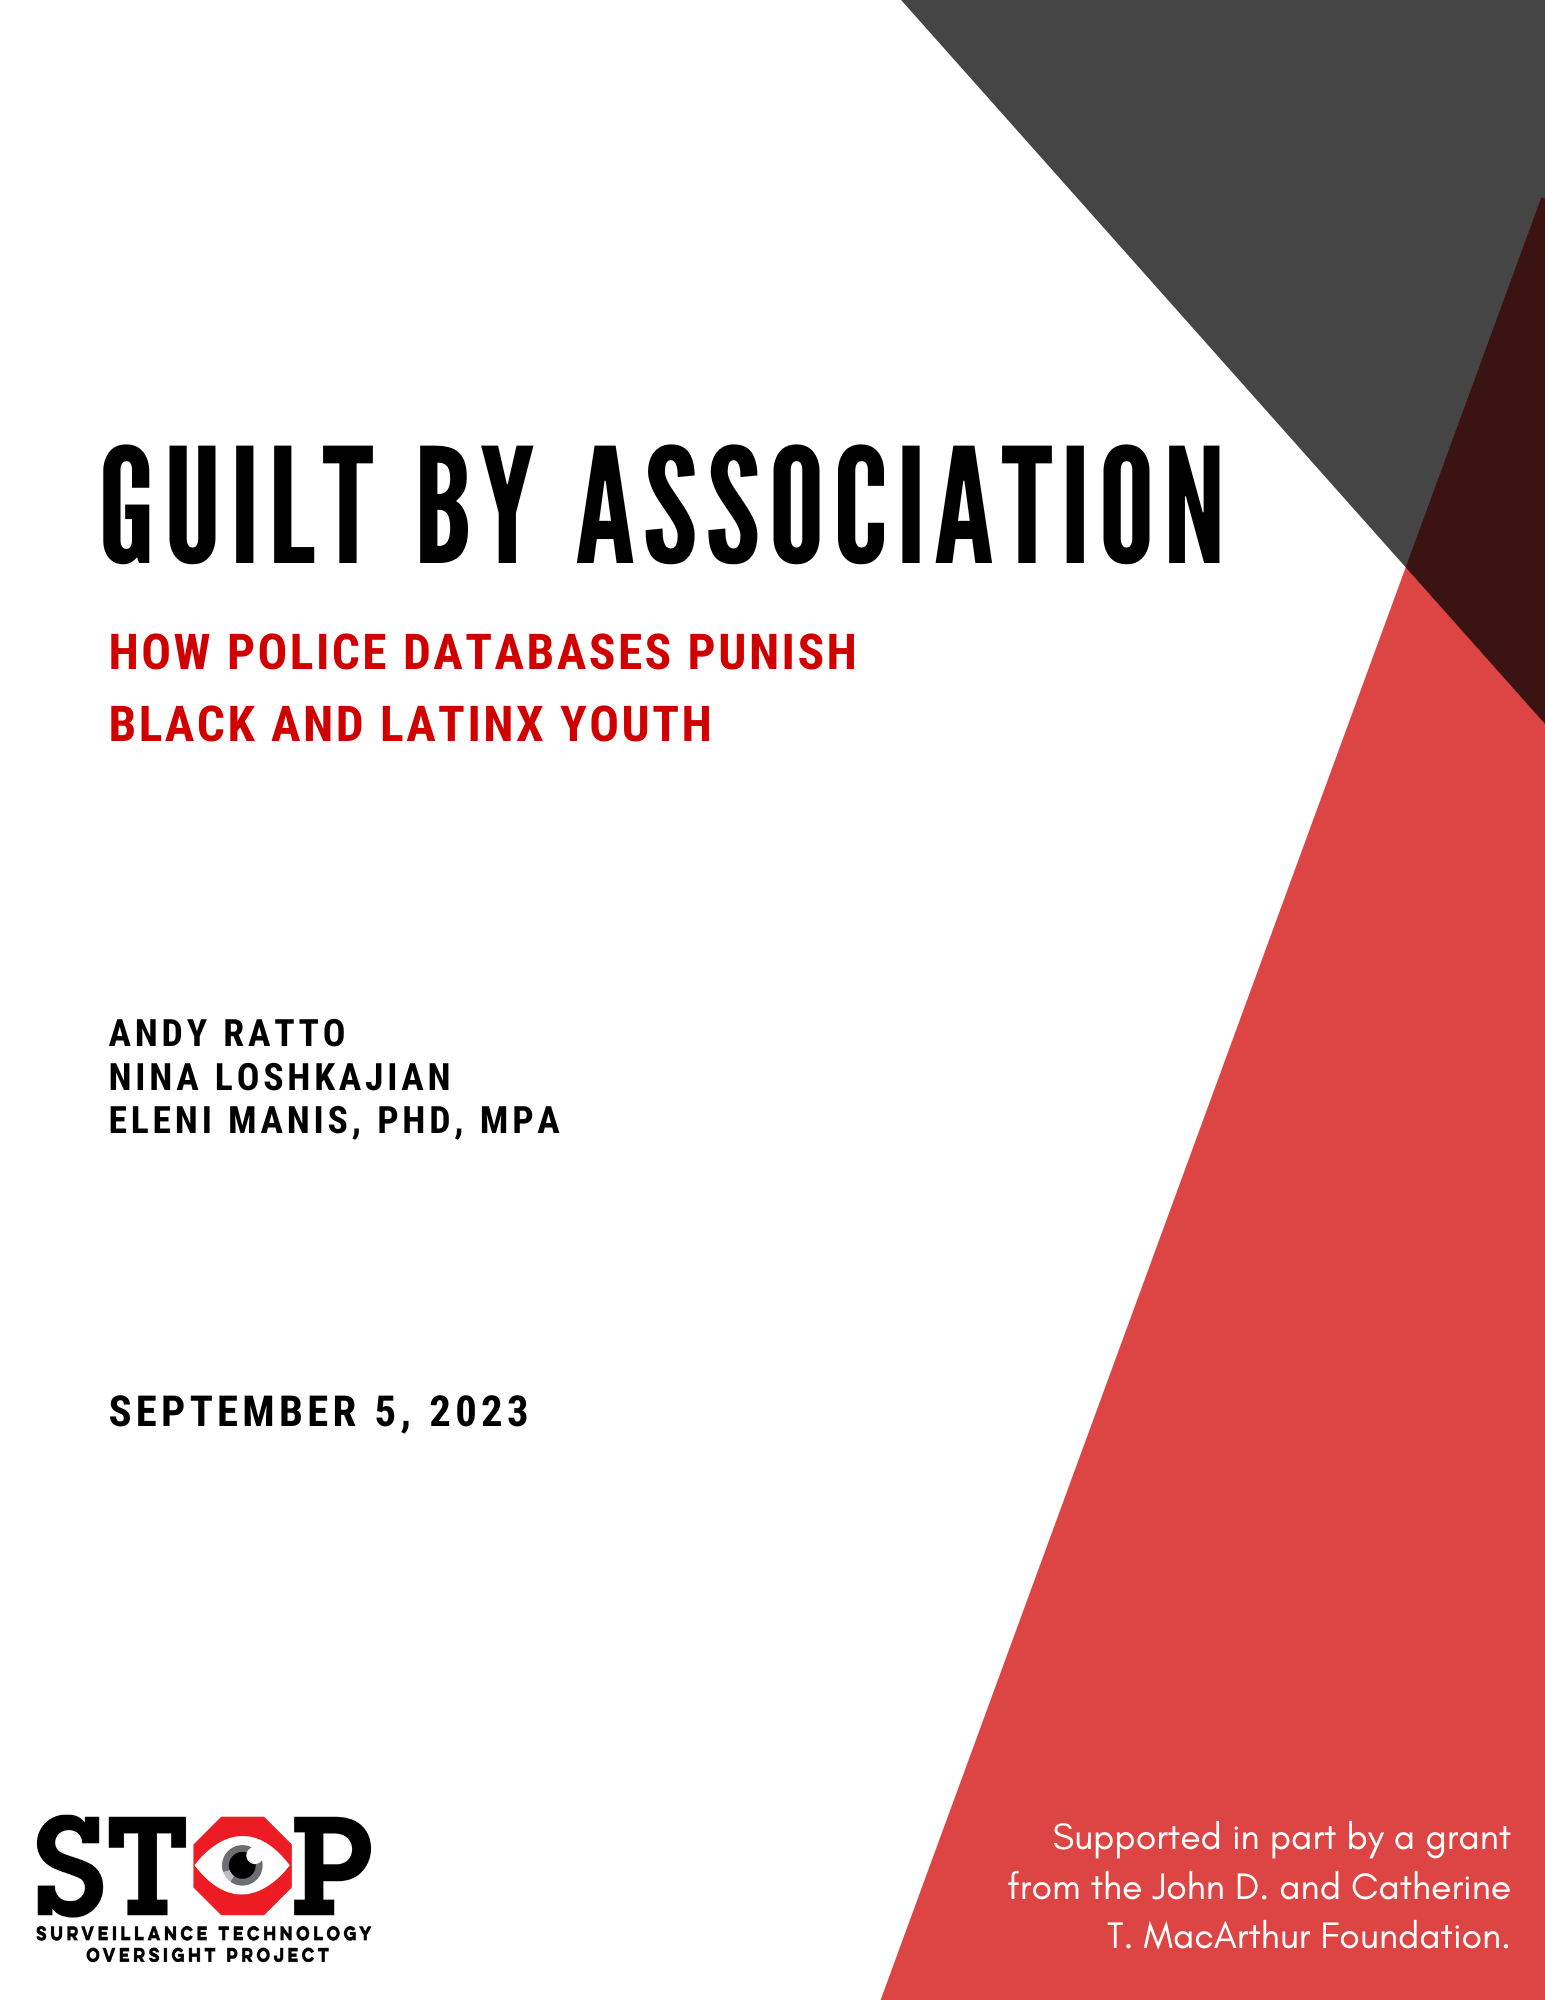 Guilt by Association: How Police Databases Punish Black and Latinx Youth